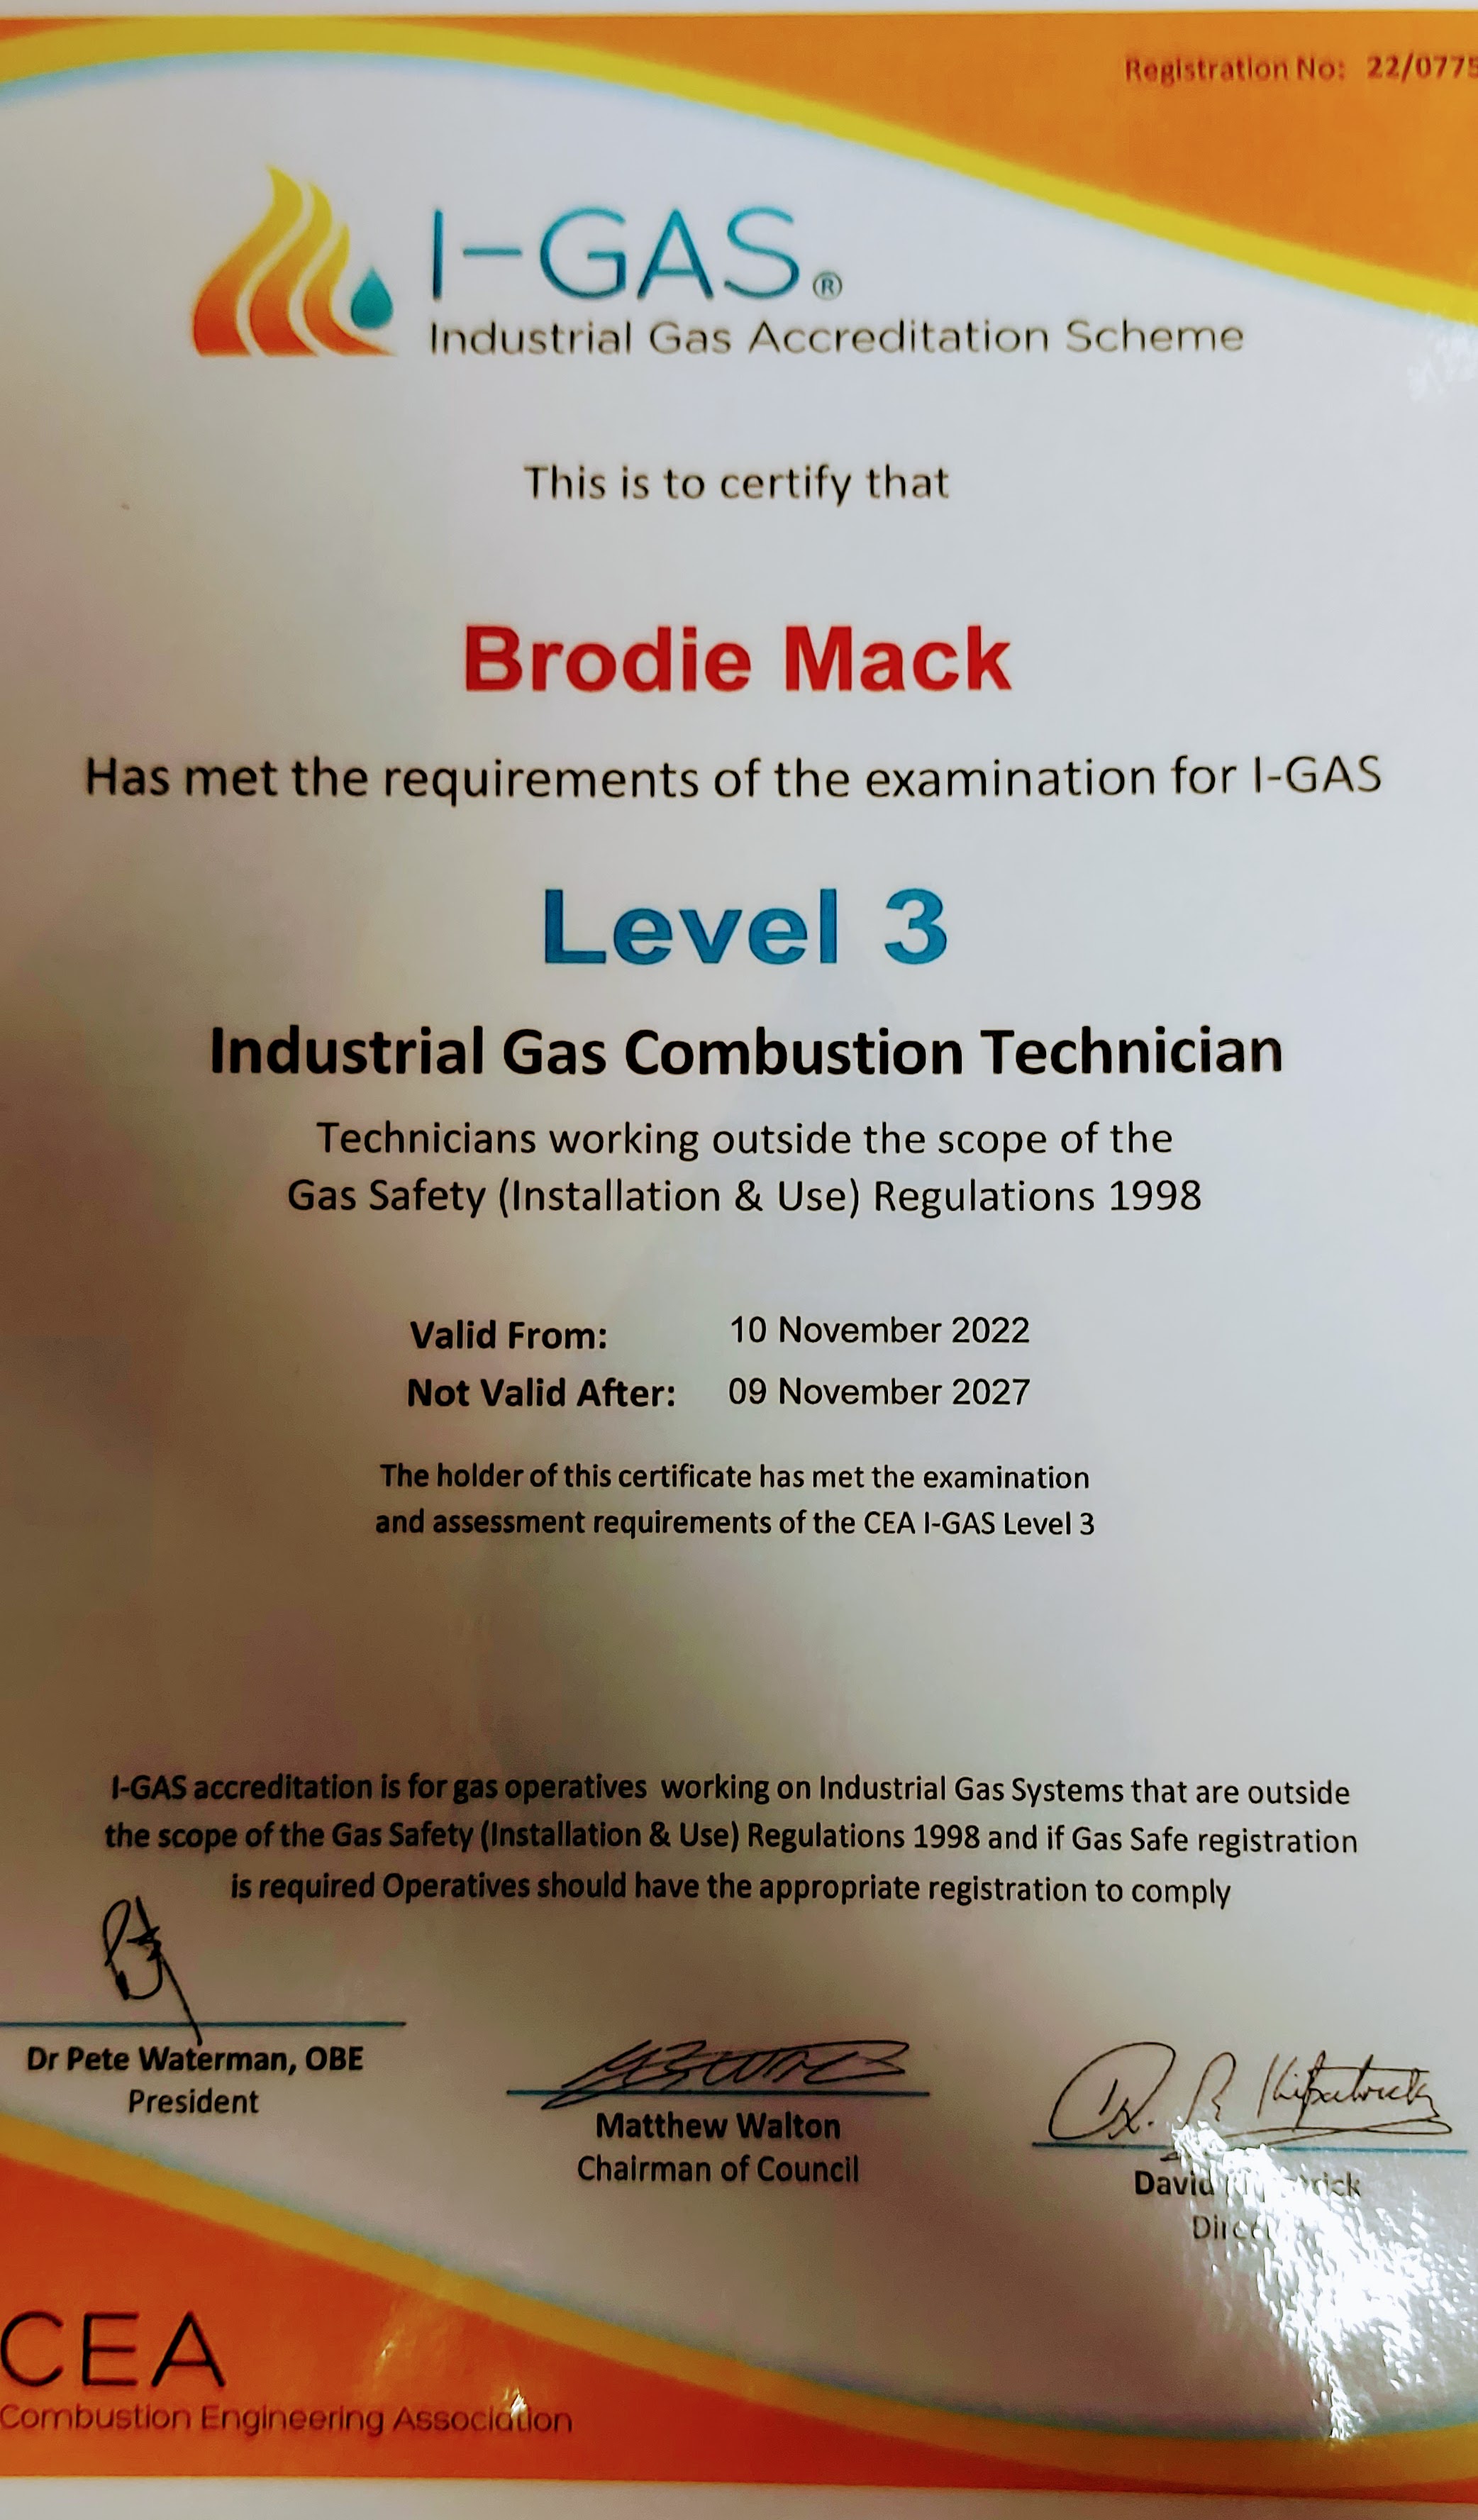 What Is I-Gas? Why Is It Important to Therser UK?